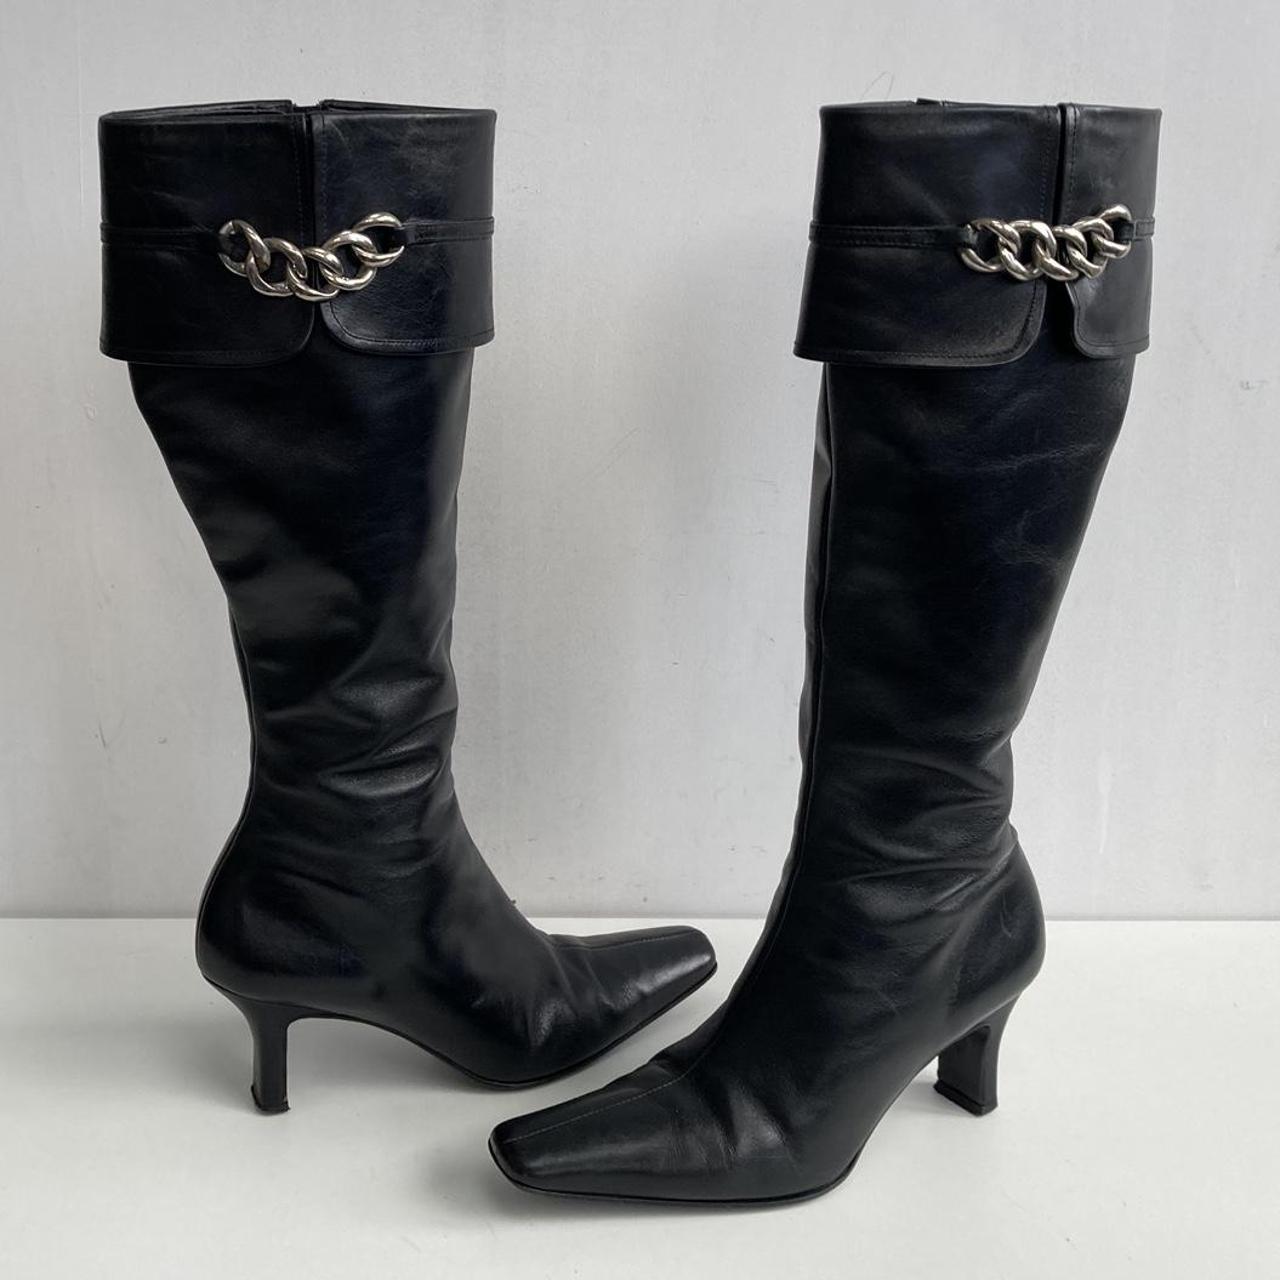 Principles Women's Black and Silver Boots | Depop